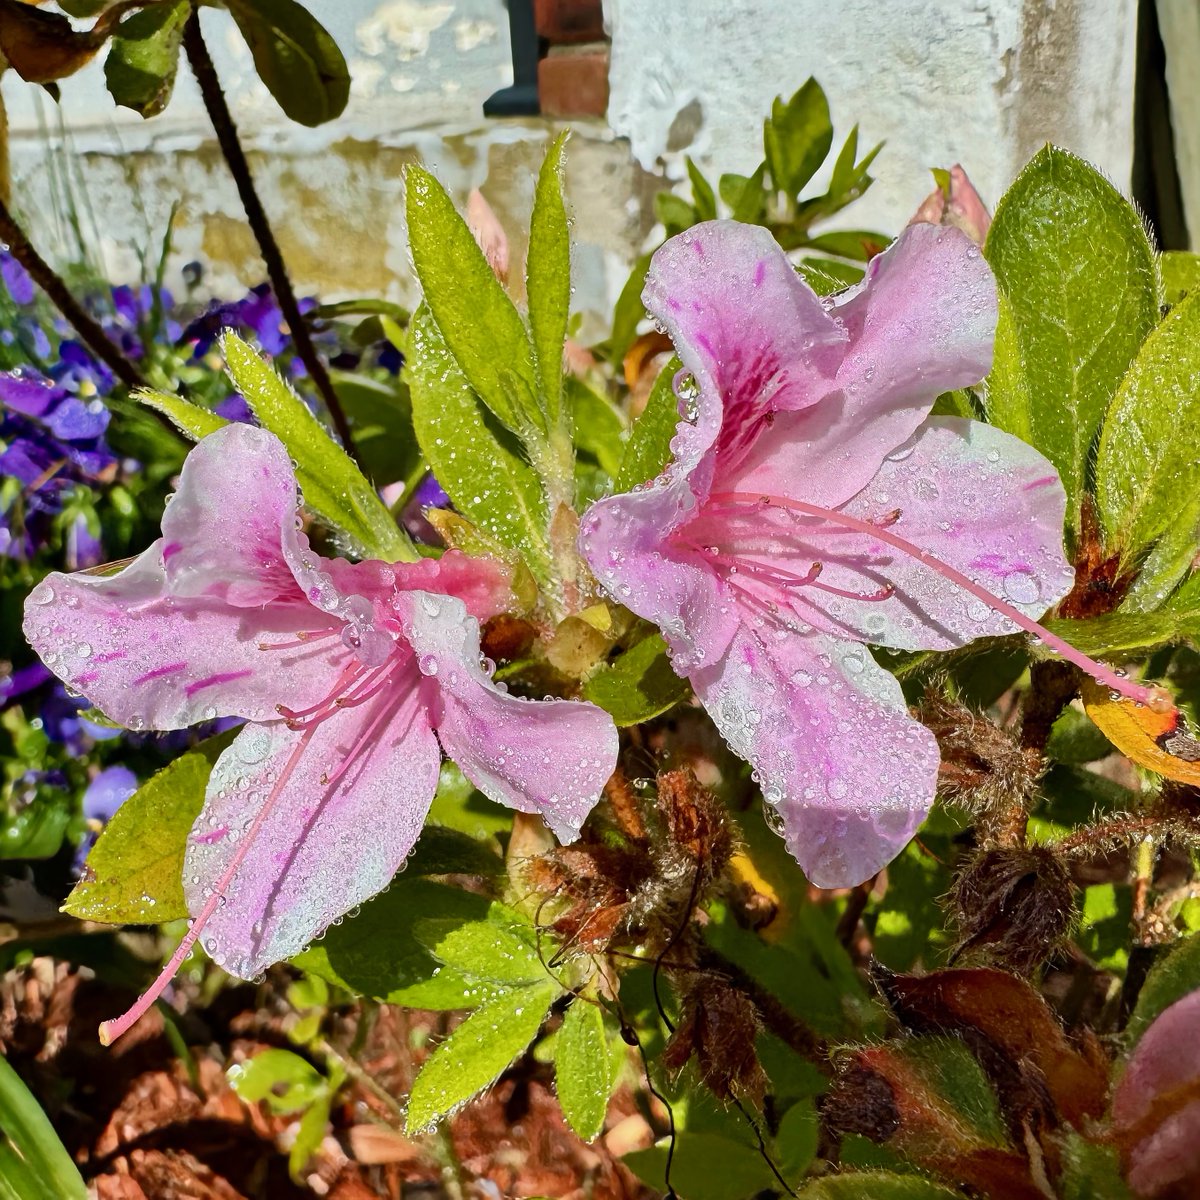 In addition to the magenta azaleas that as old as I am, my brother bought some new ones last year that we planted in the Fall.  These are their first blooms in the garden!

#SpringFlowers #Flowers #Azalea #TrumbullCT